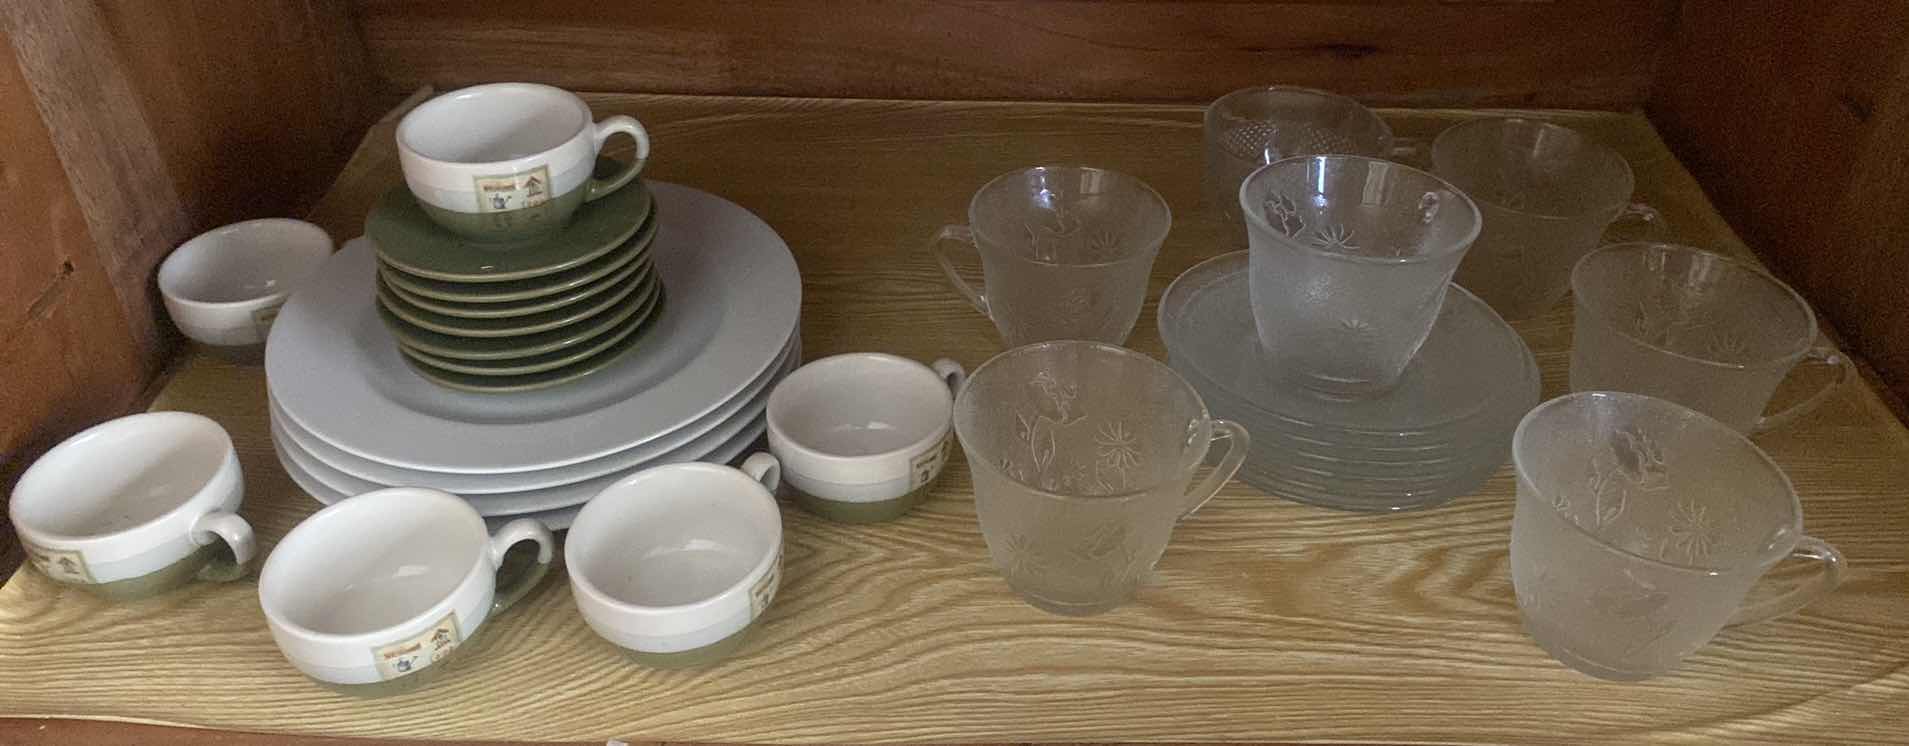 Photo 1 of TEA SET AND CLEAR GLASS SERVING PLATES WITH CUPS